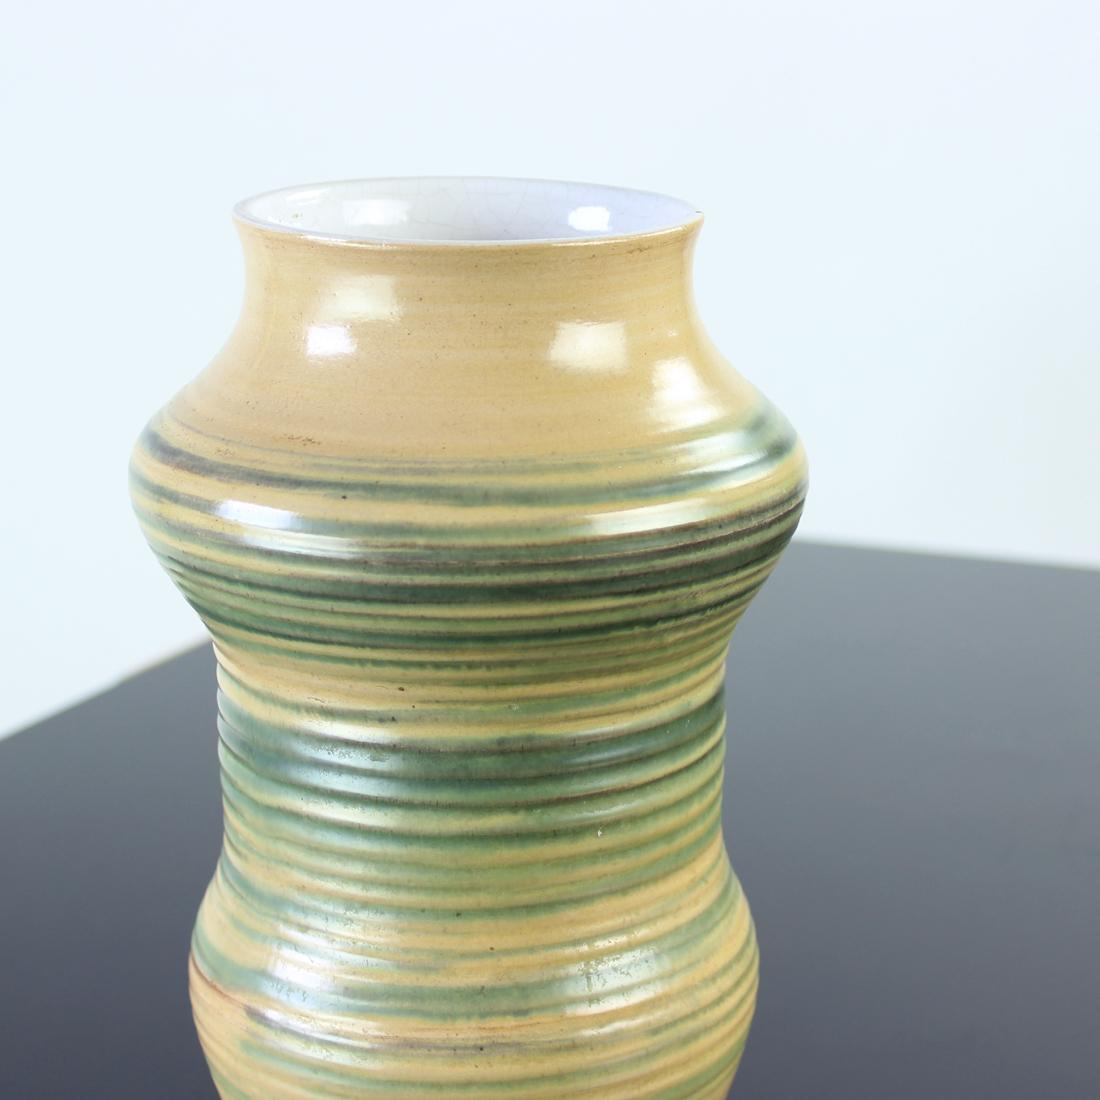 Beautiful mid-century vase produced in Czechoslovakia in 1960s. The vase is made of caramics with glaze. The outside is handpainted into a typical mid-century design. The inside in glazed in white glaze, so that the vase can be used with water in